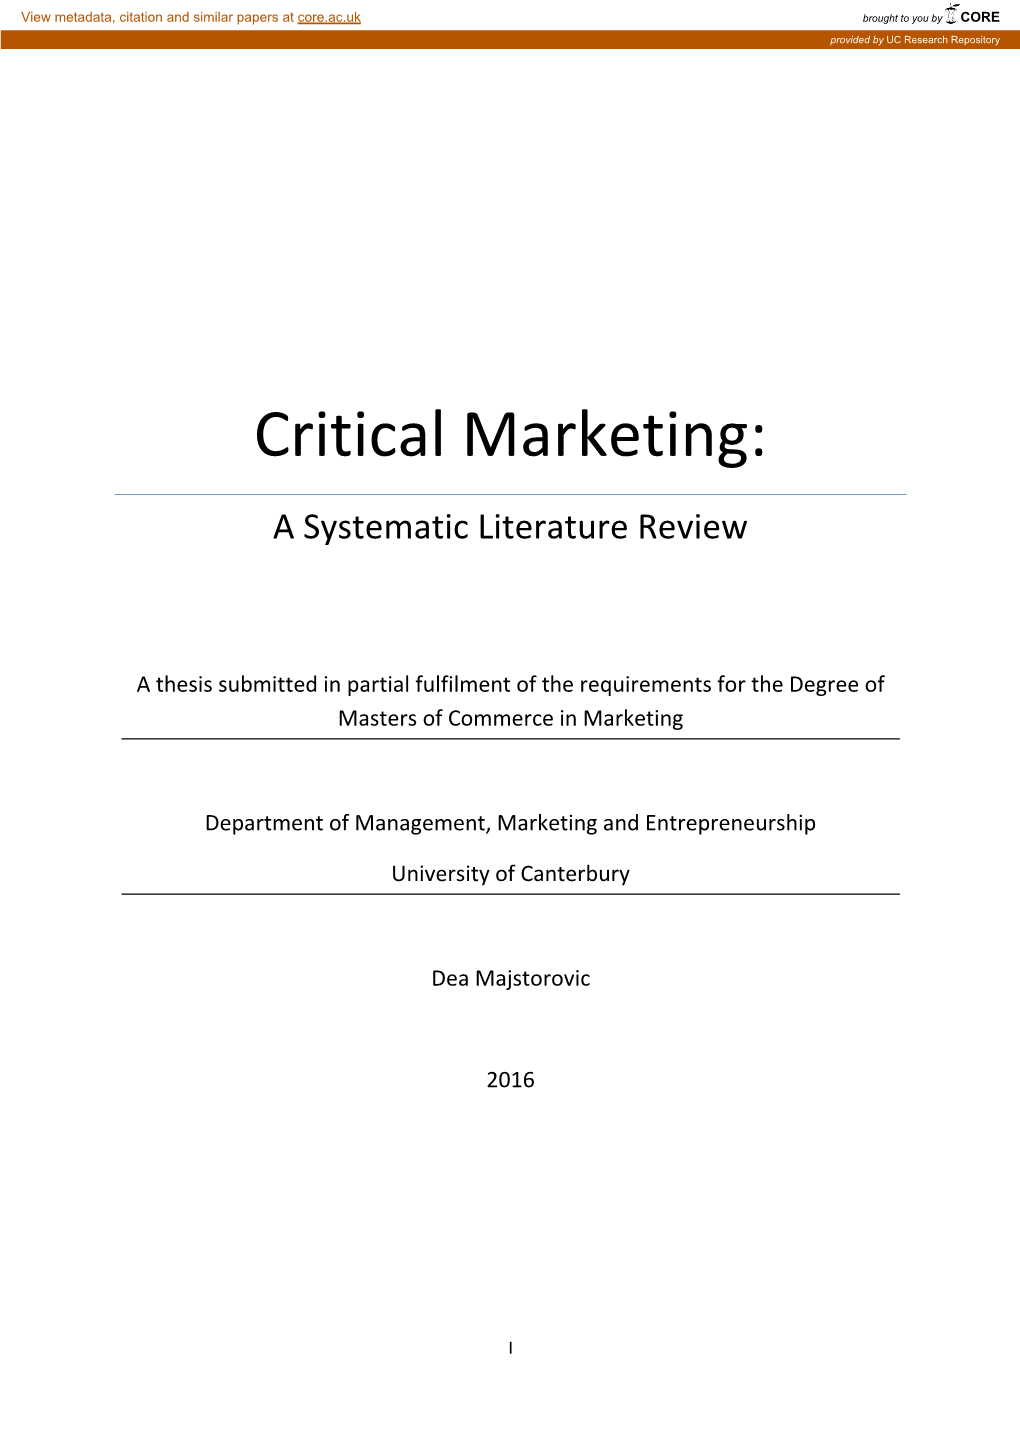 Critical Marketing: a Systematic Literature Review